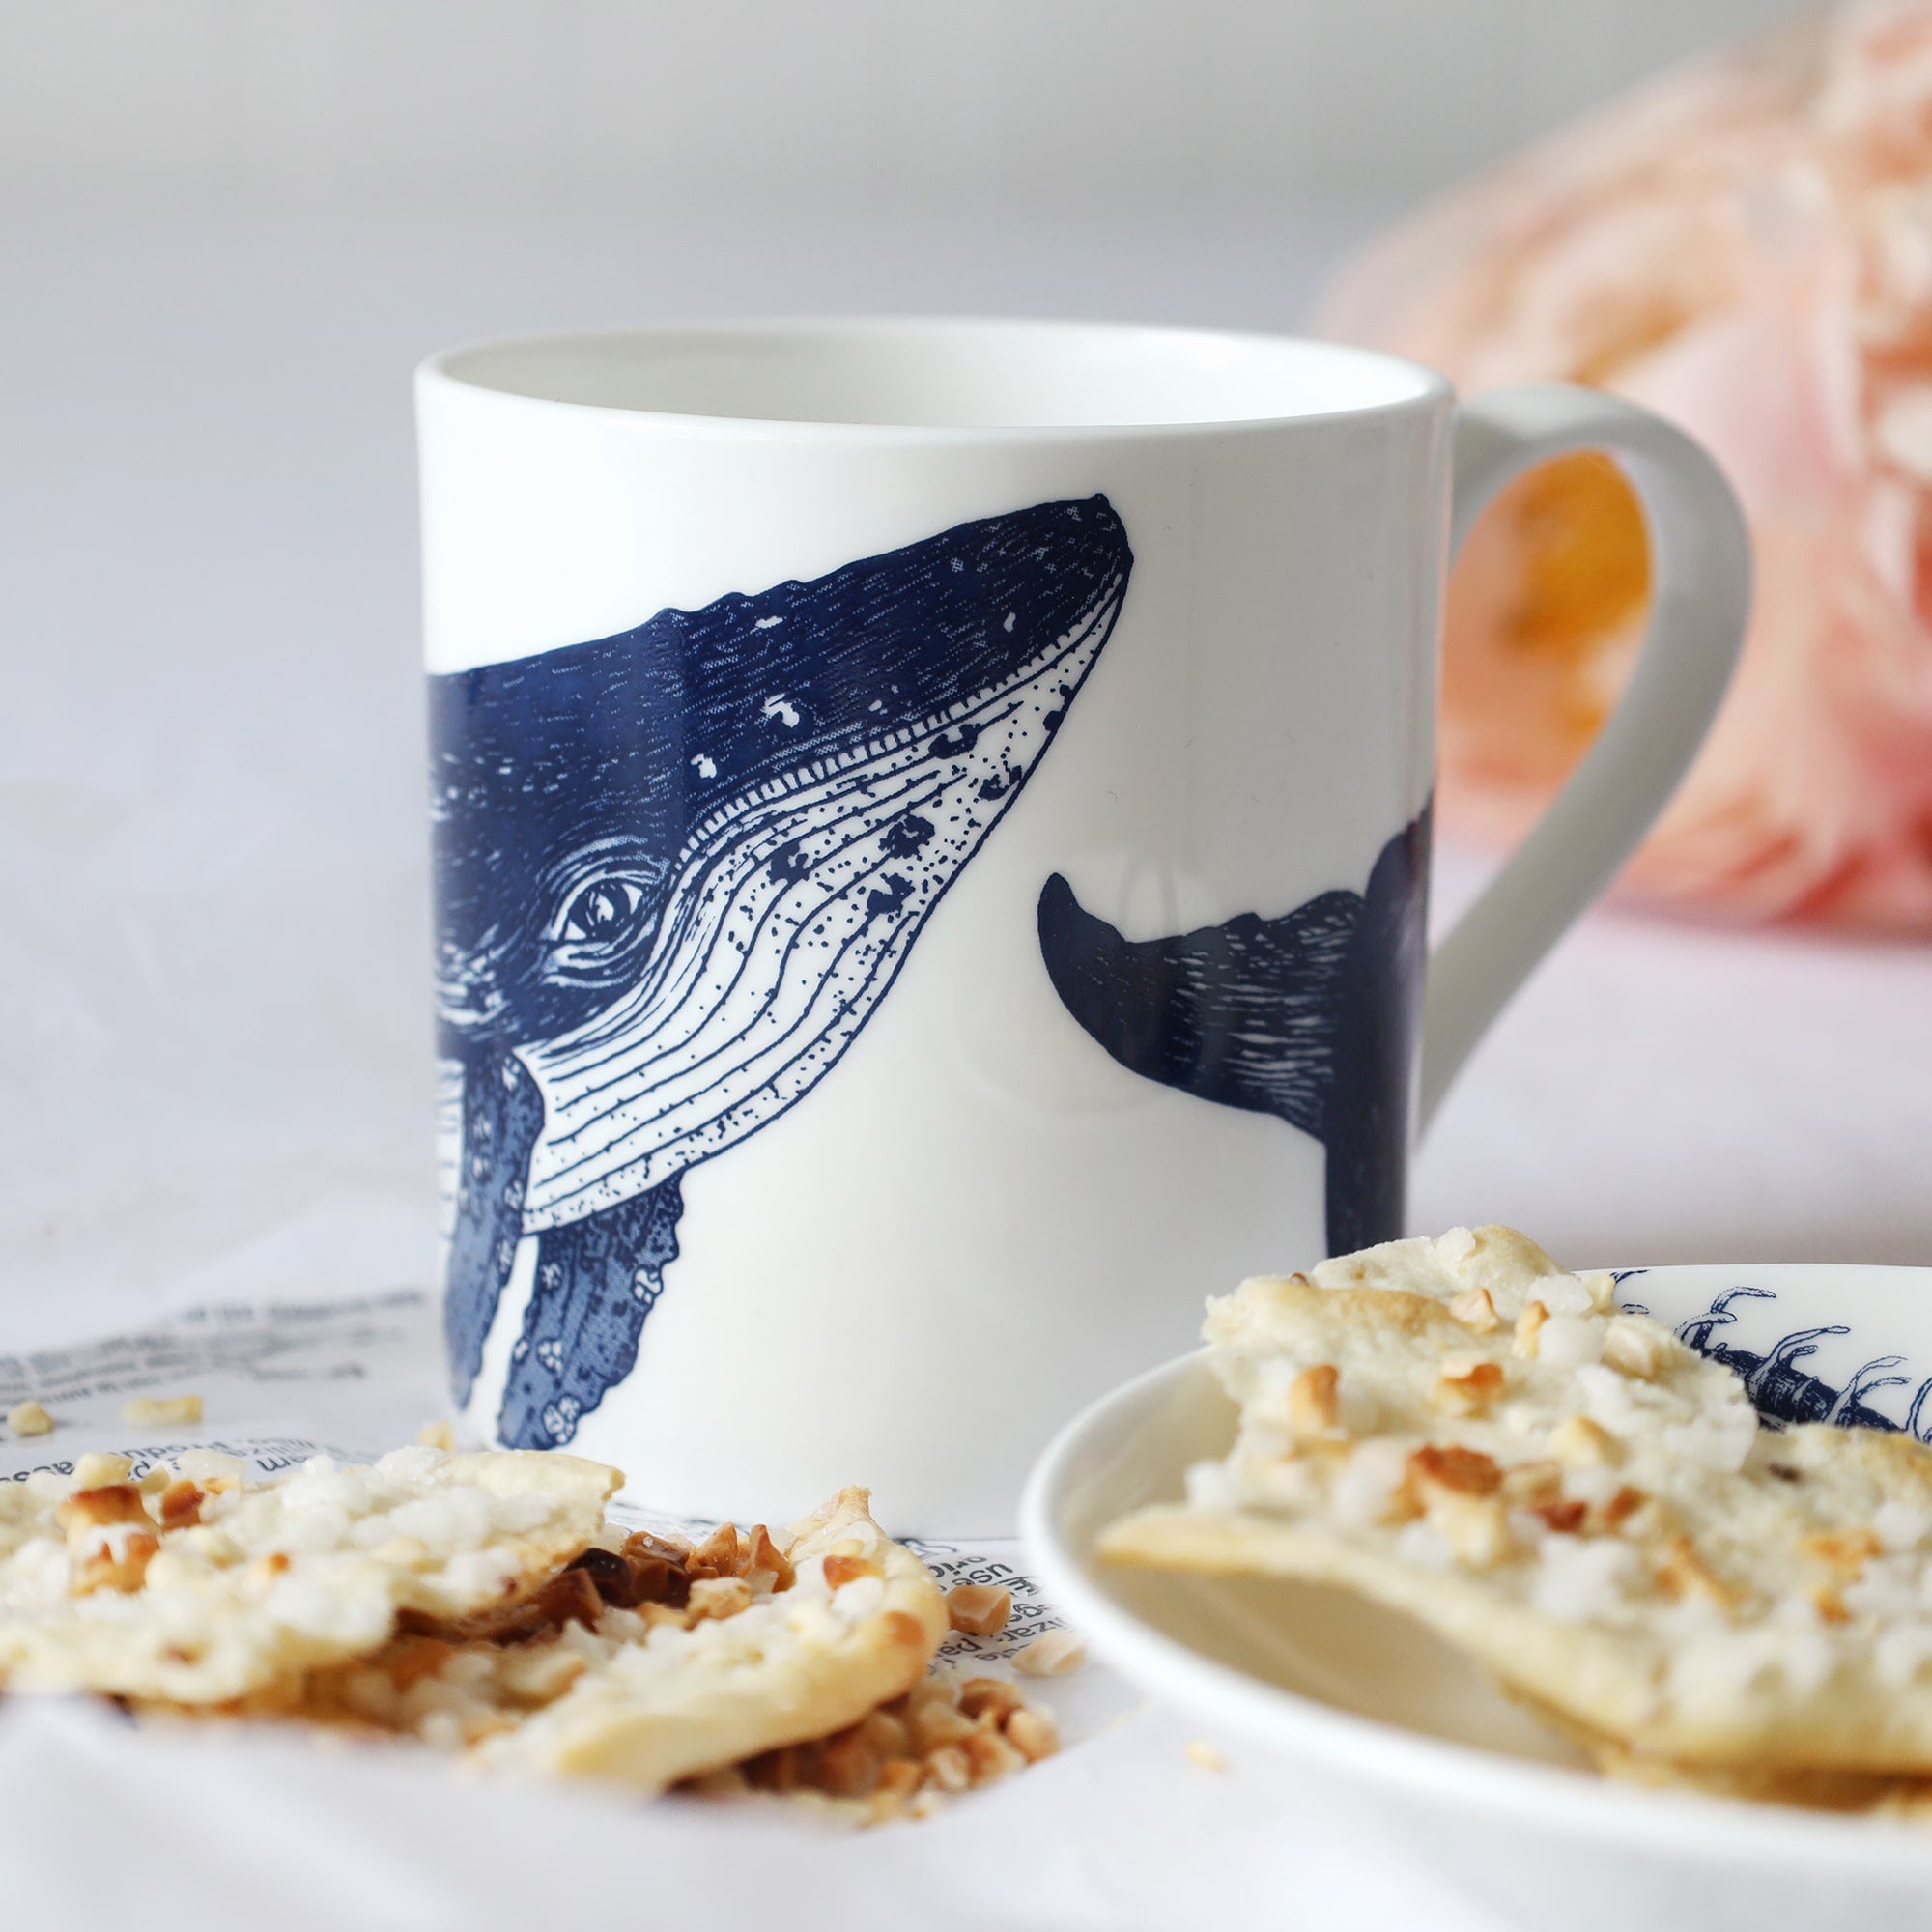 White mug with dark blue humpback whale illustration sitting on a table with a plate & biscuits and flowers in the background.